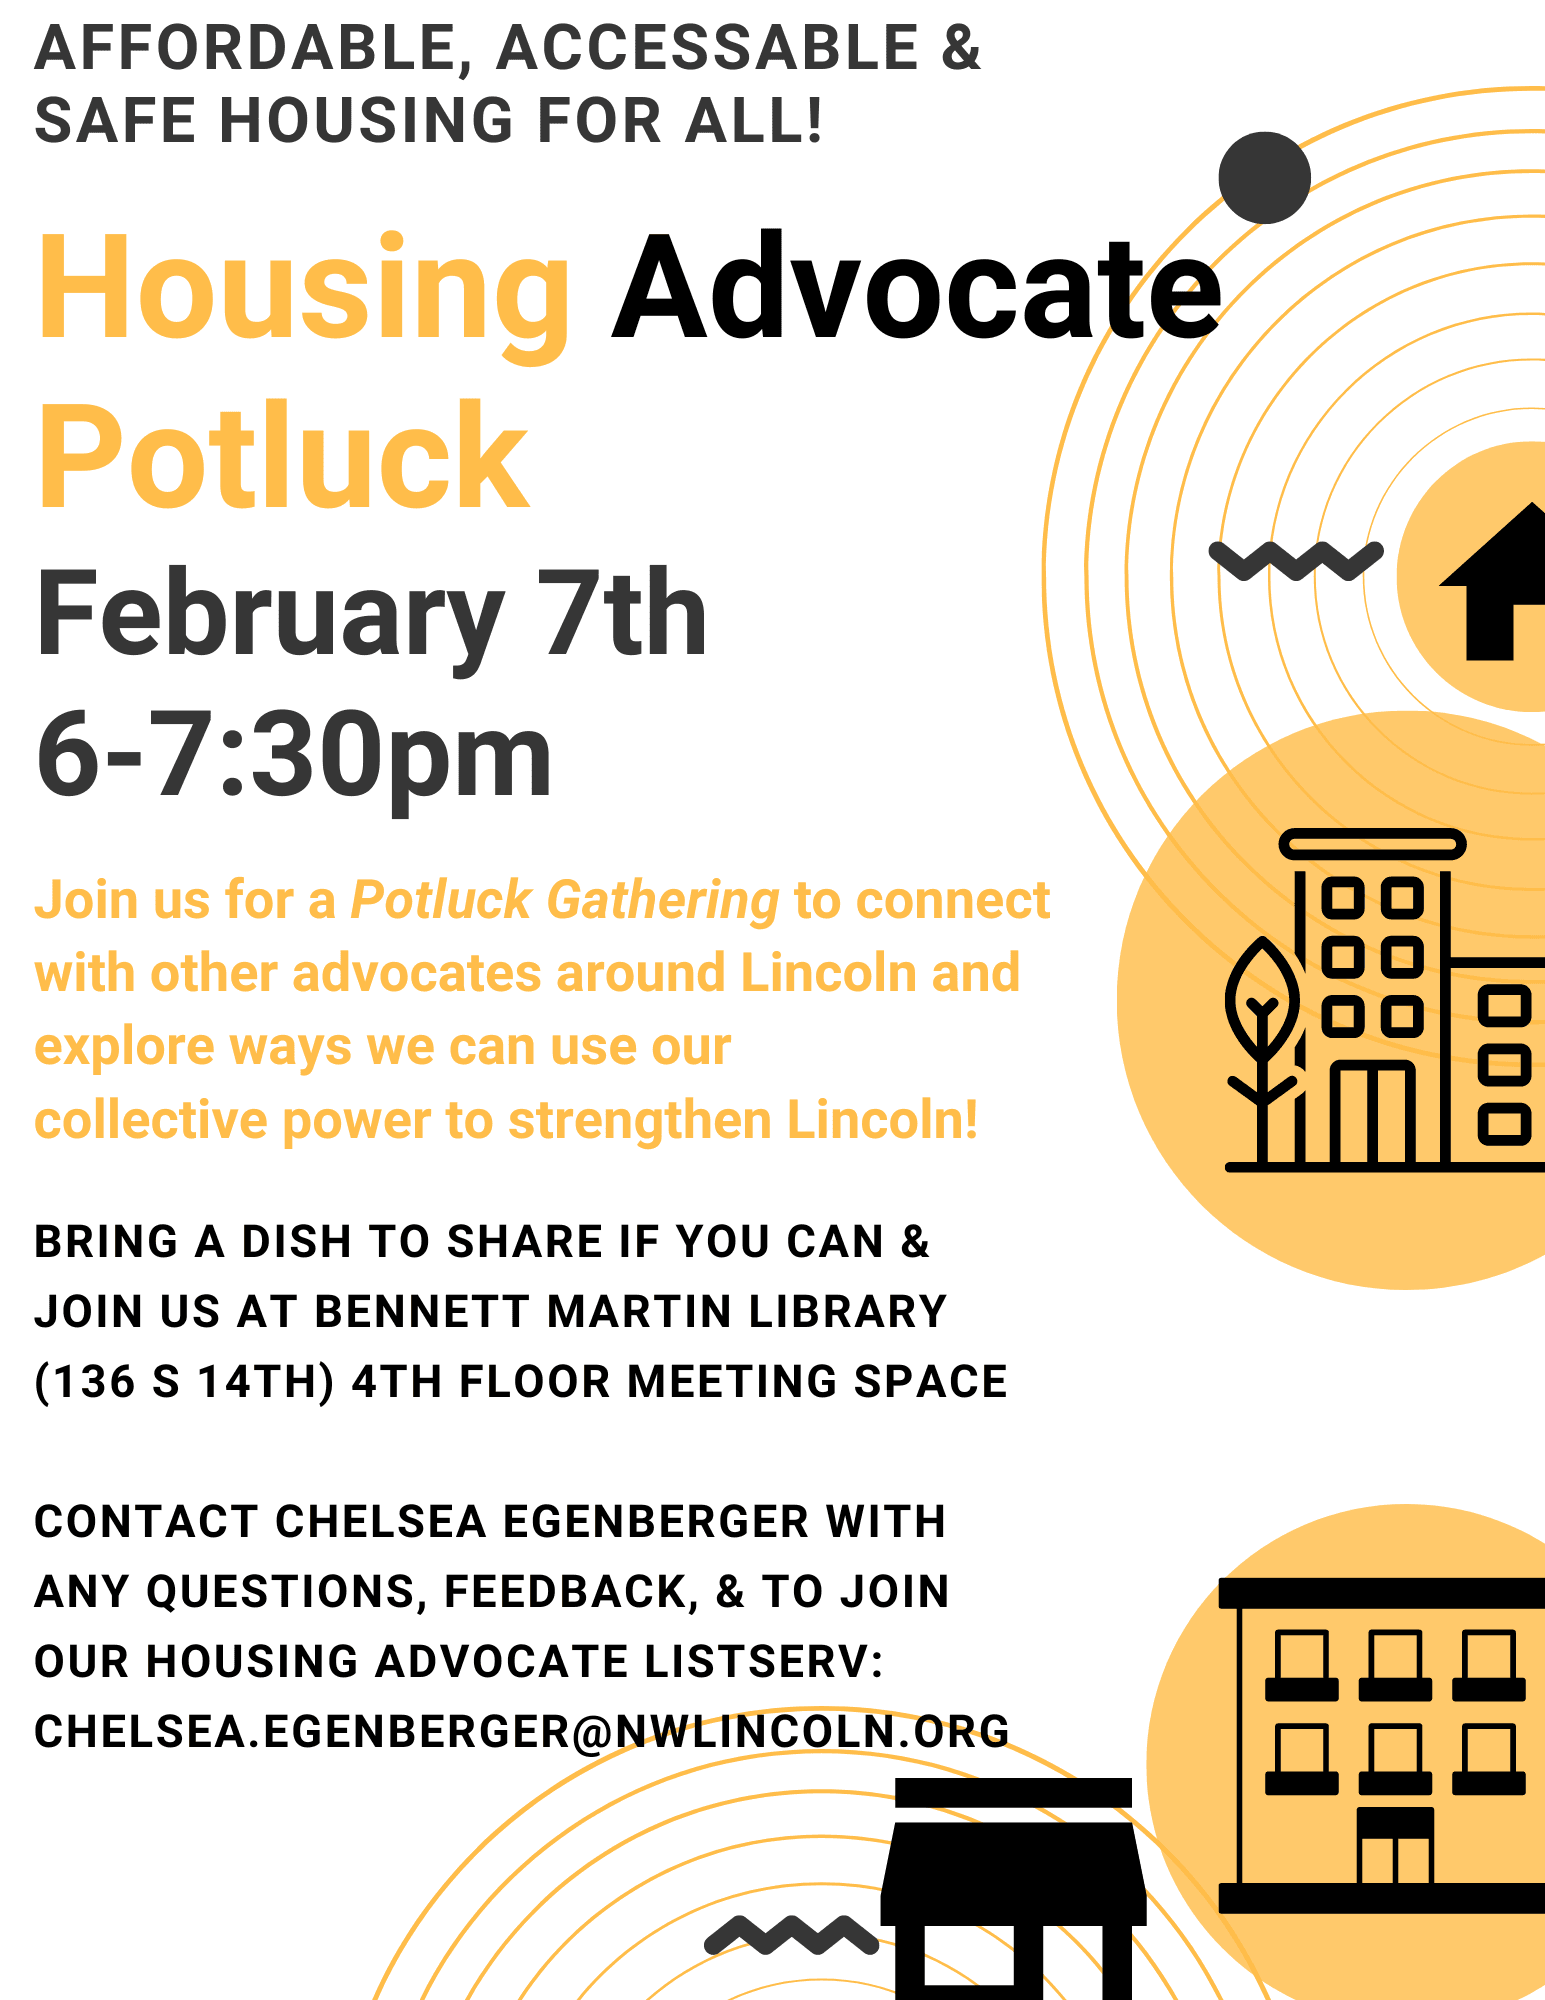 Housing Advocate Potluck for Affordable, Accessible, Safe Housing for All!